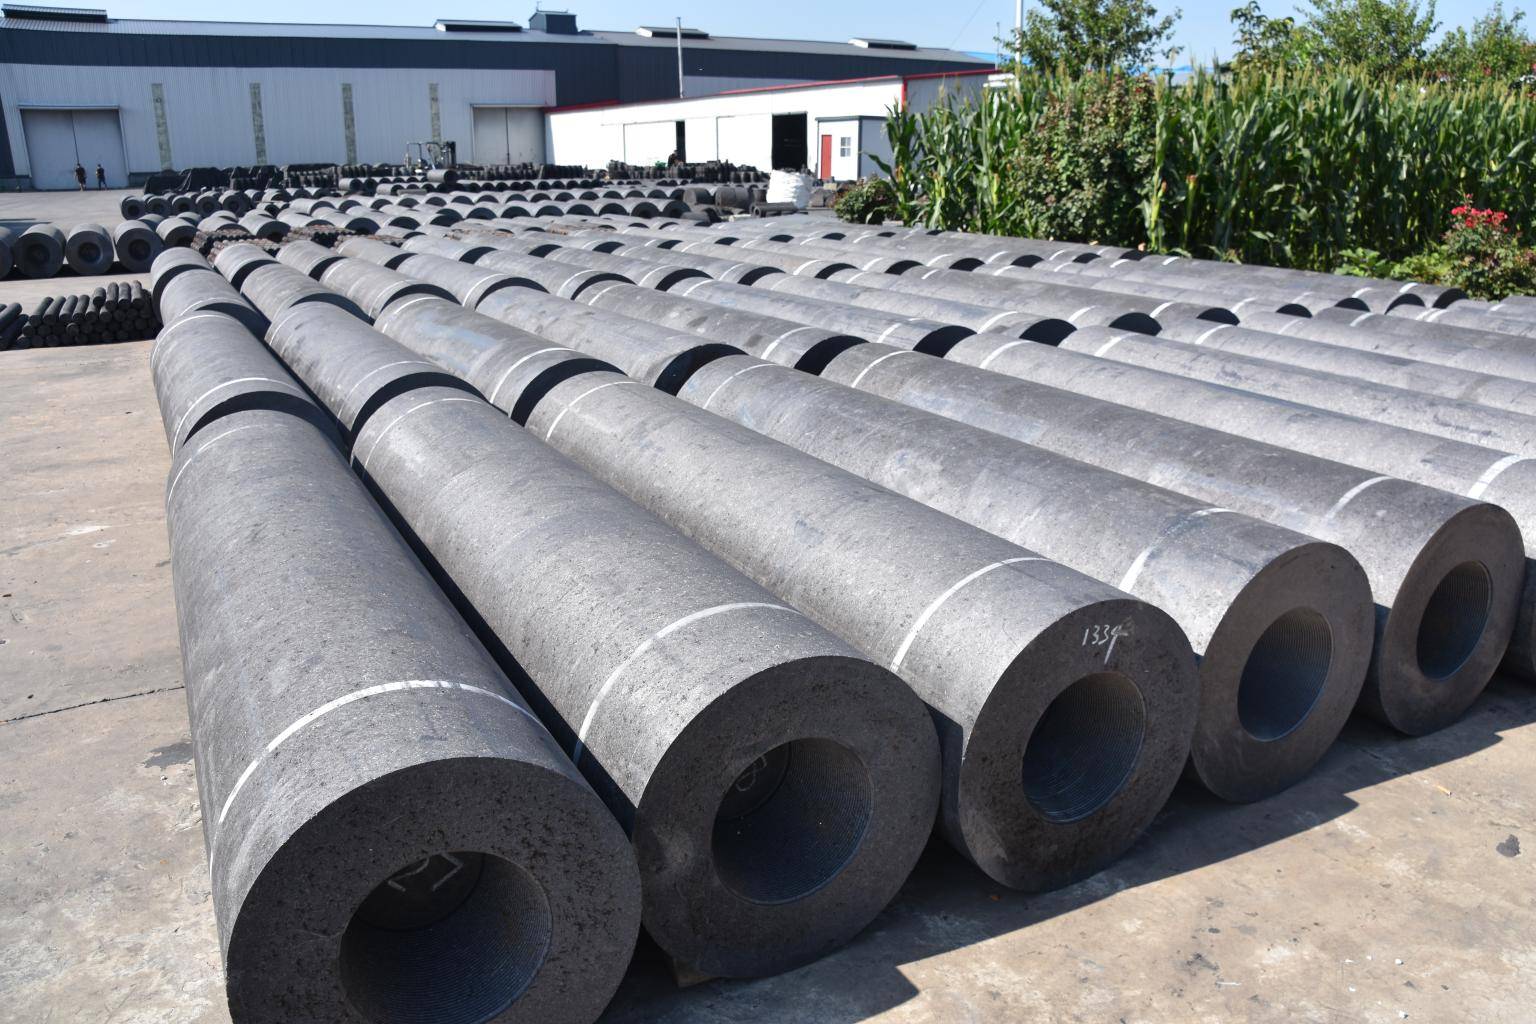 Raw materials continue to rise, graphite electrodes are gaining momentum